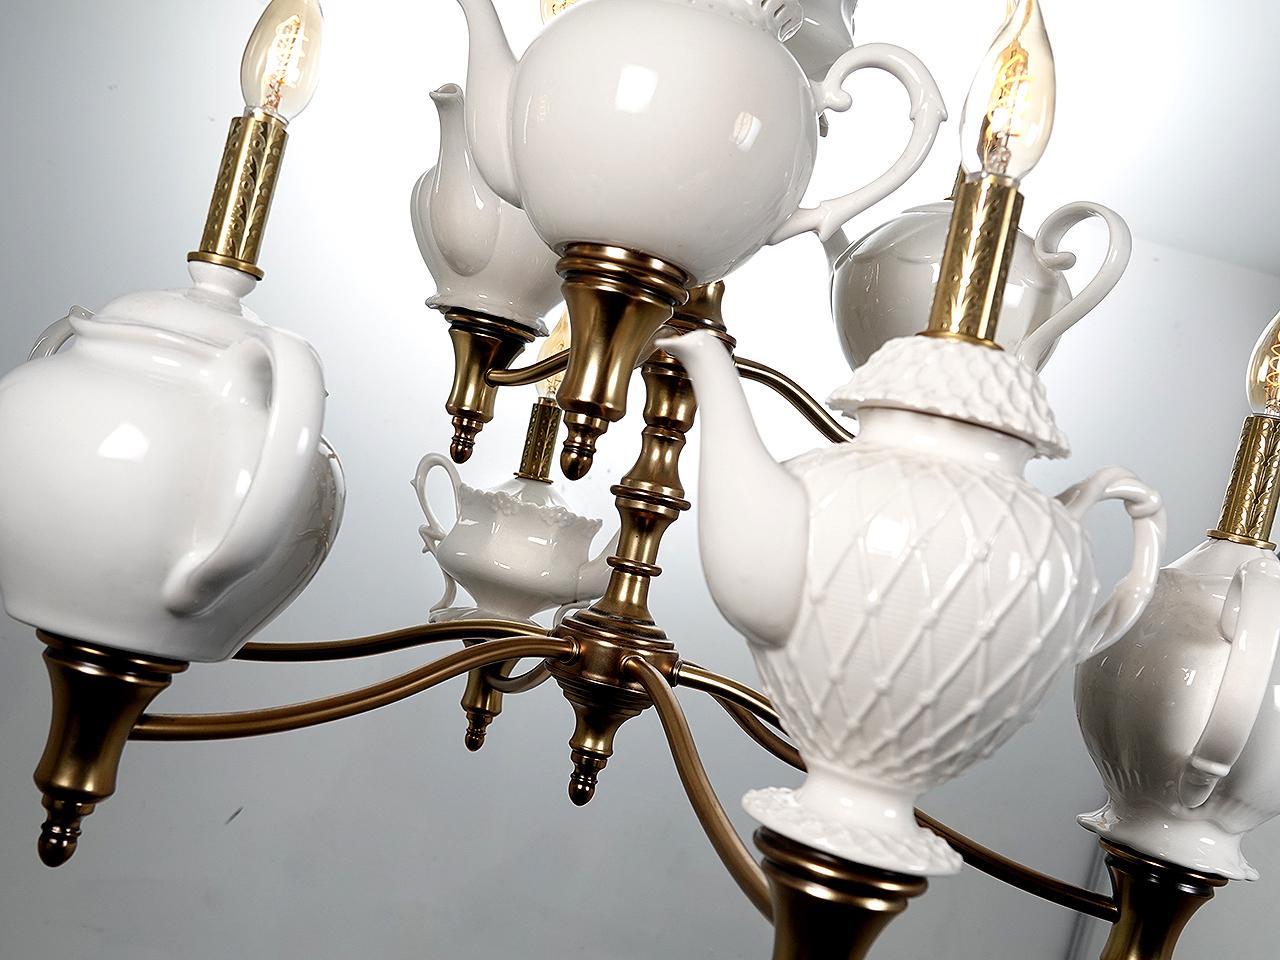 This is not the type of lighting you will normally find in my listing. I just couldn't help myself. The fixture has great style and a sense of humor. The lamp features a collection of ten different tea pots and nine have bulbs on top. Every time I